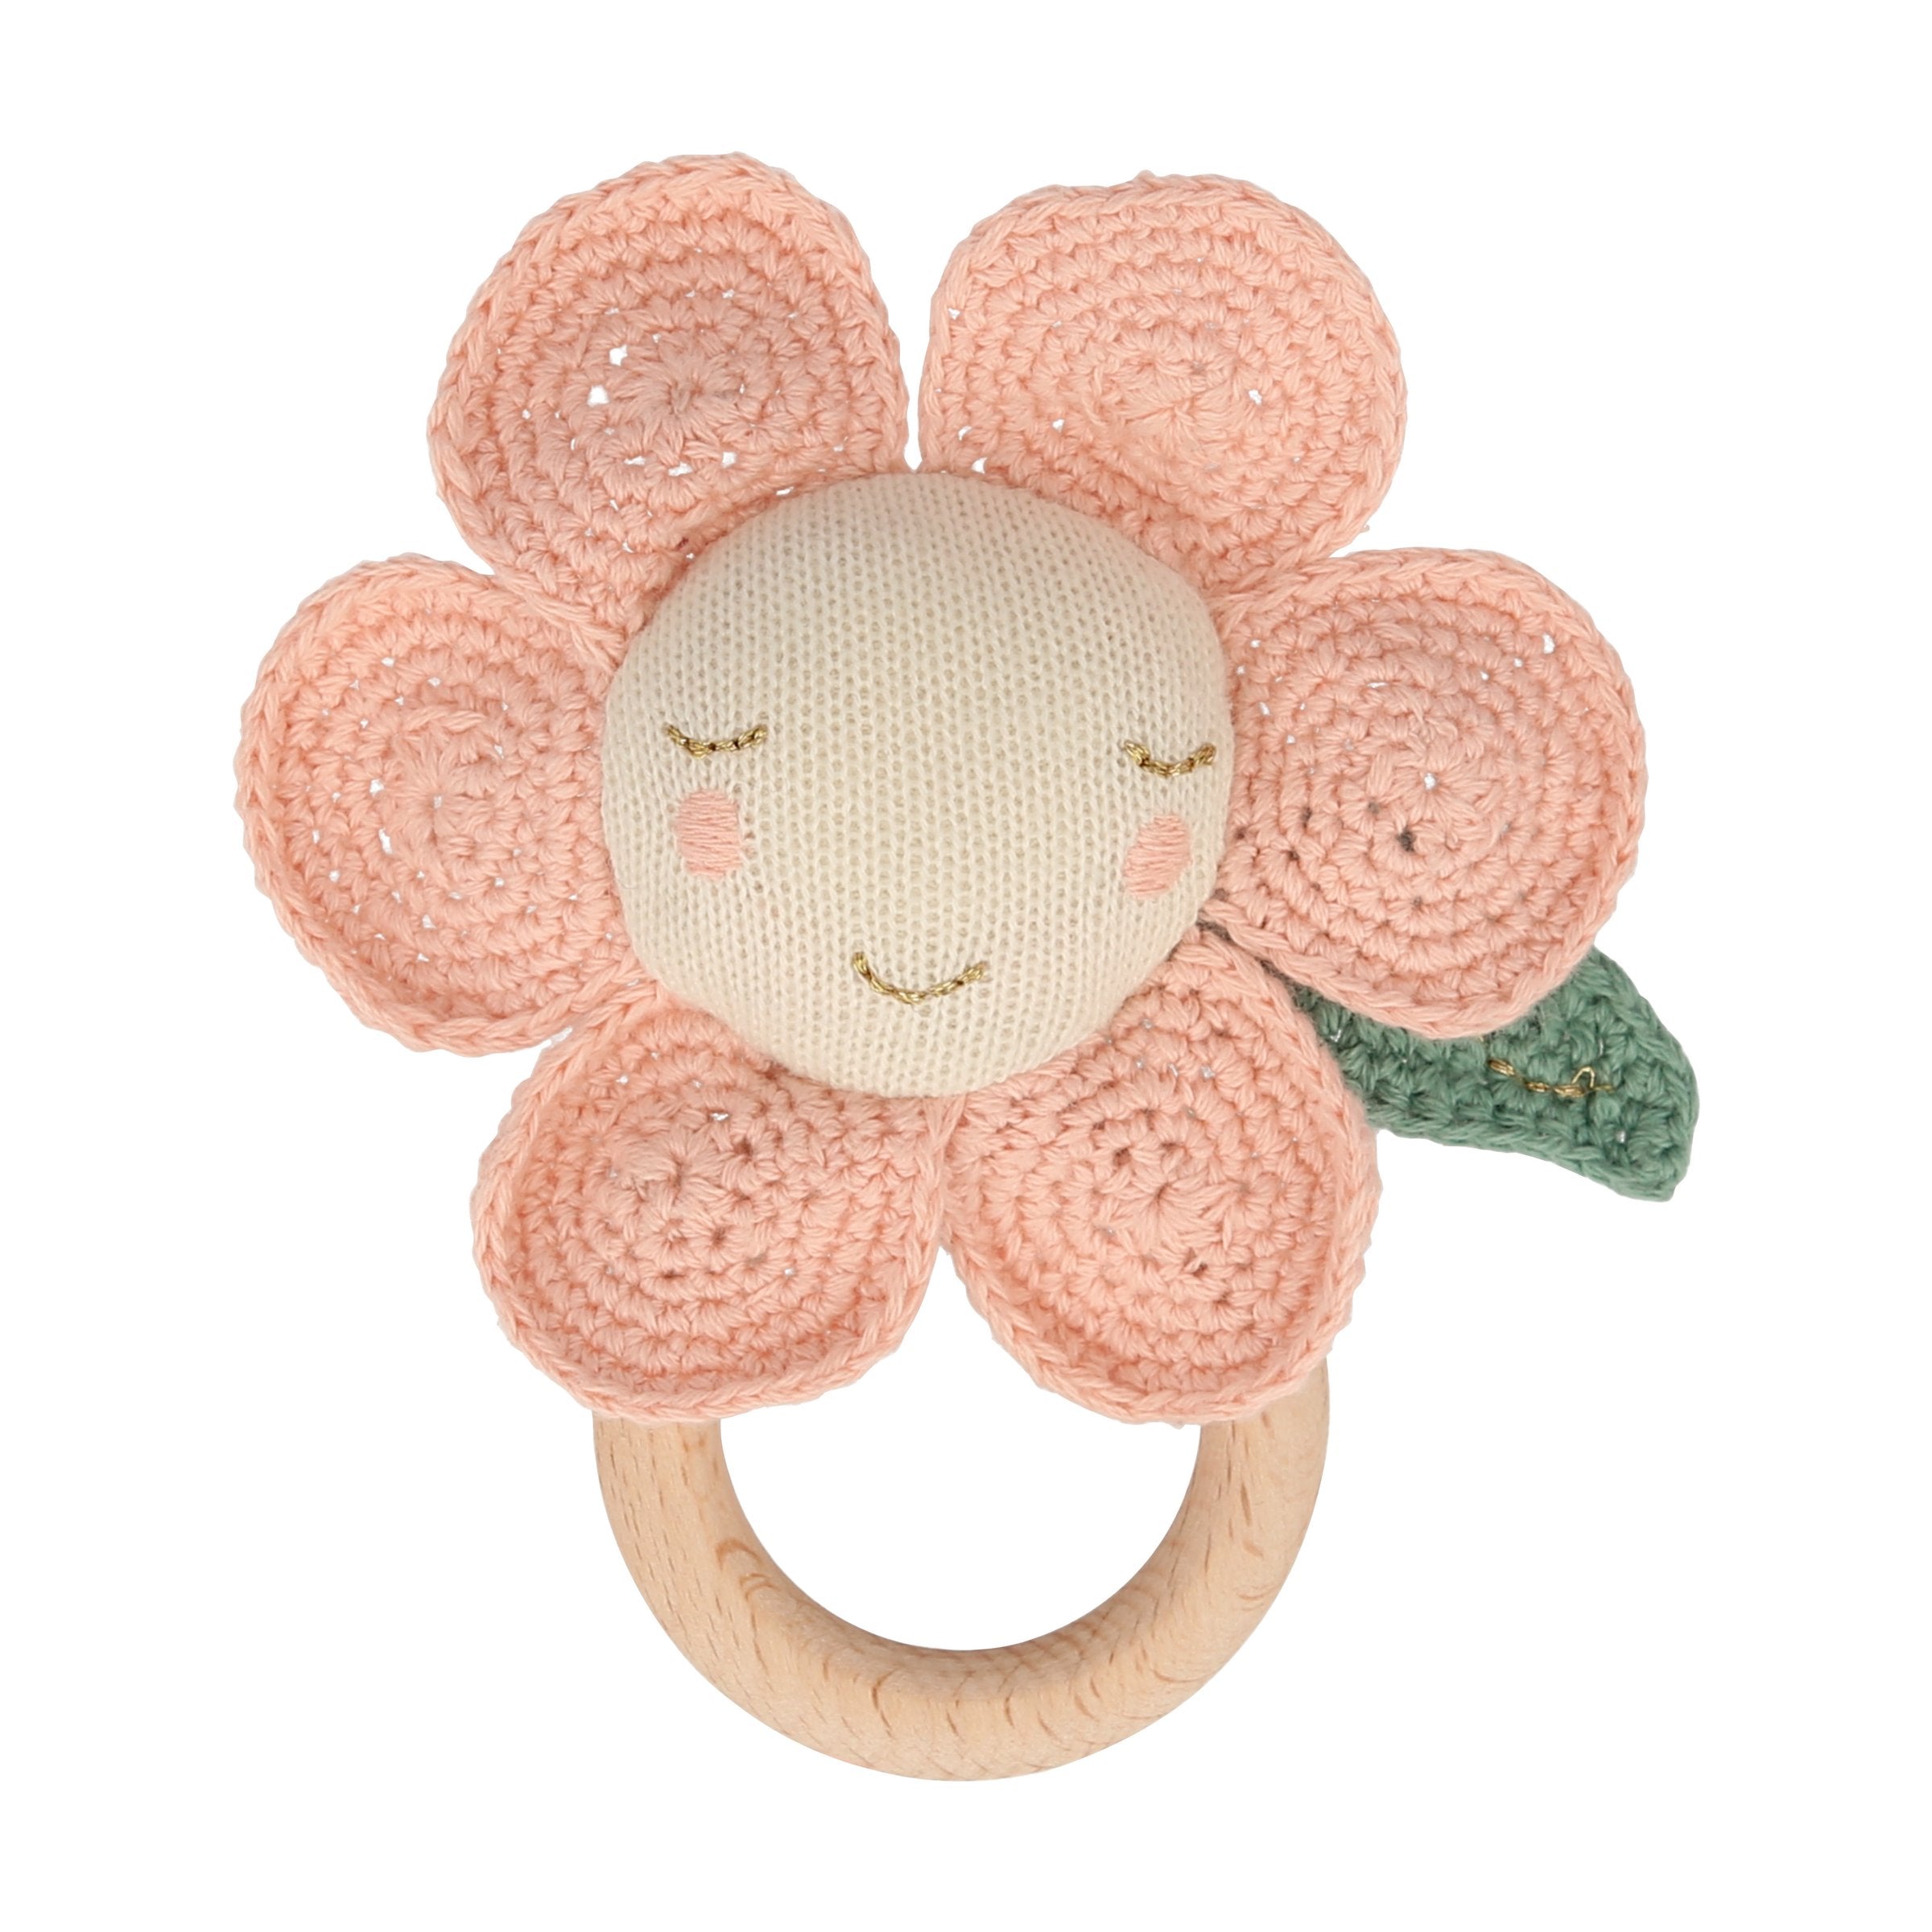 This adorable daisy baby rattle is crafted from knitted organic cotton, with a wooden grip ring and soft noise rattle